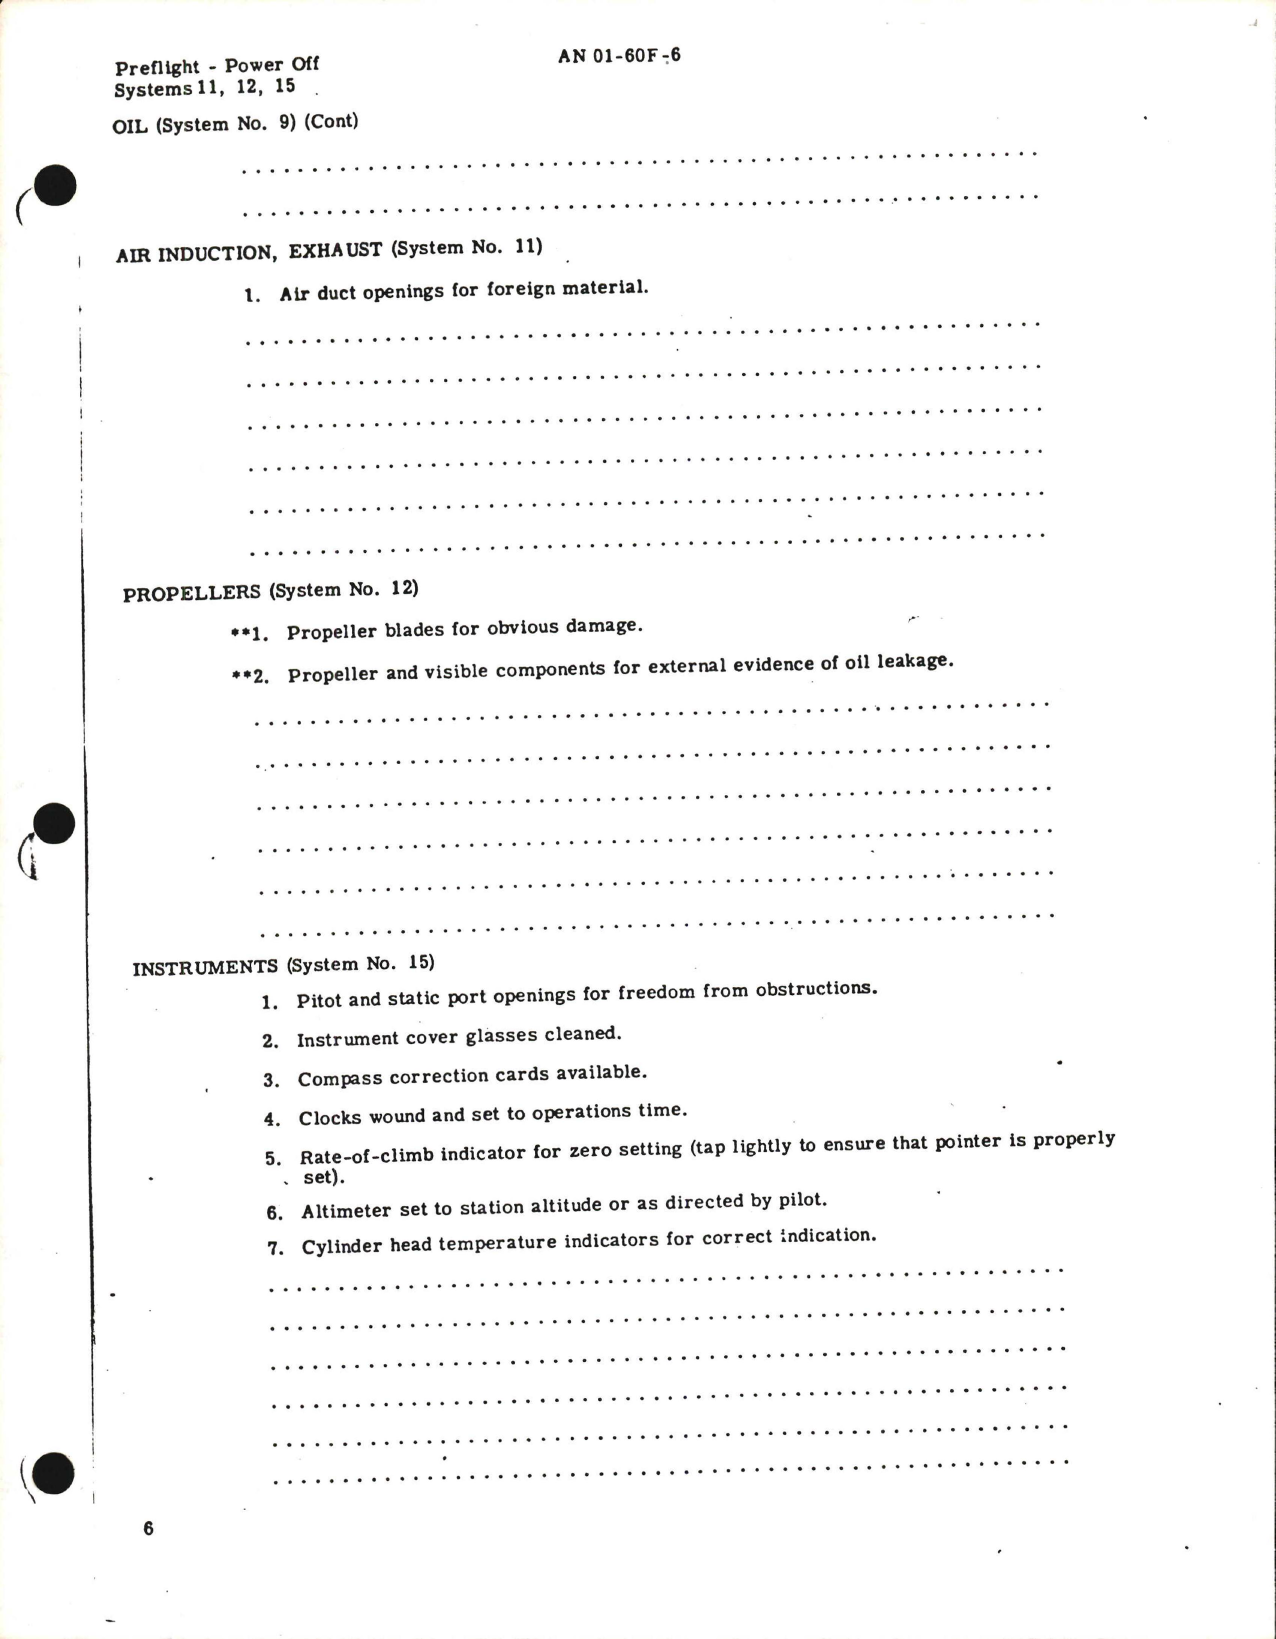 Sample page 7 from AirCorps Library document: Inspection Requirements for T-6